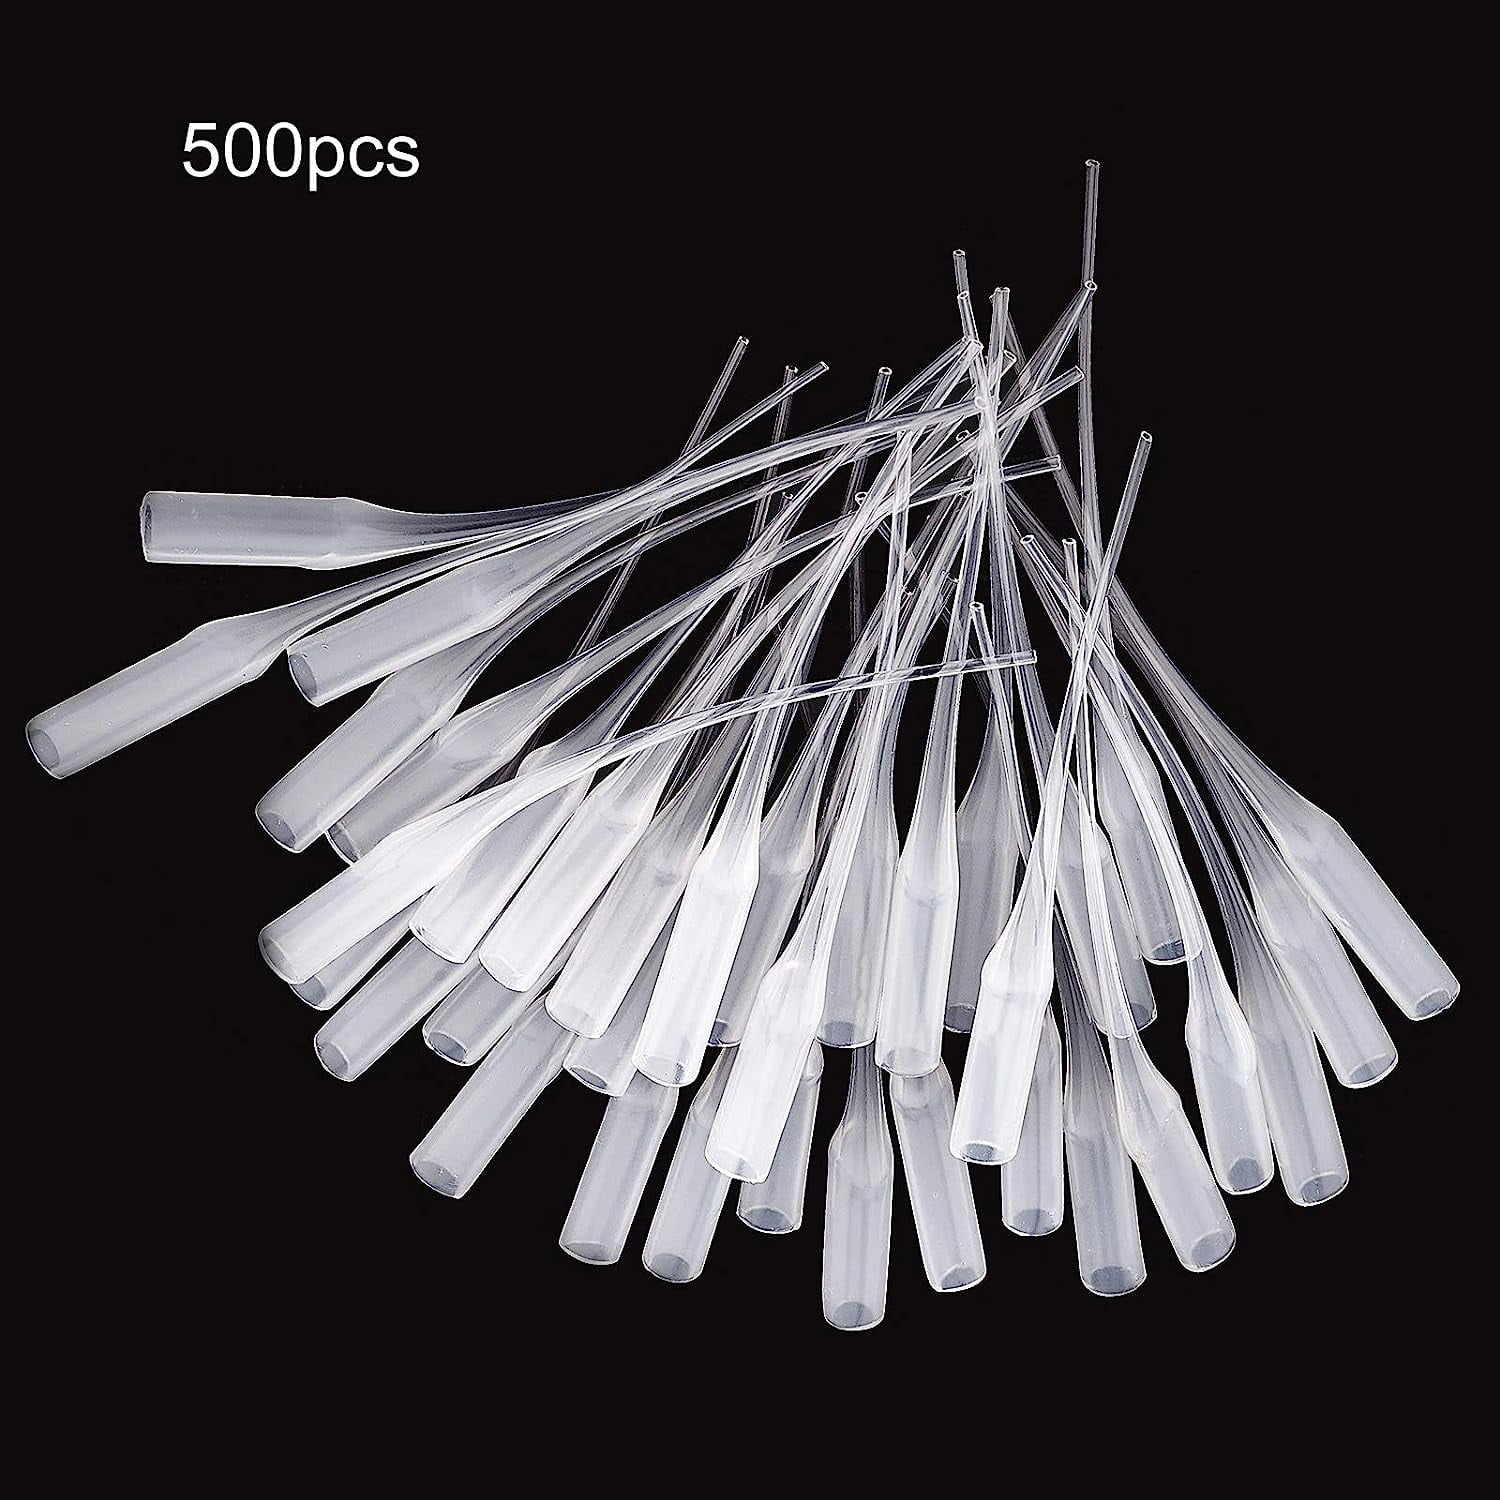 Glue Tips 100pcs Plastic Glue Micro-Tips Glue Extender Precision CA Glue  Applicator for Arts Crafts Hobby Projects Guitar Fret Slot White 